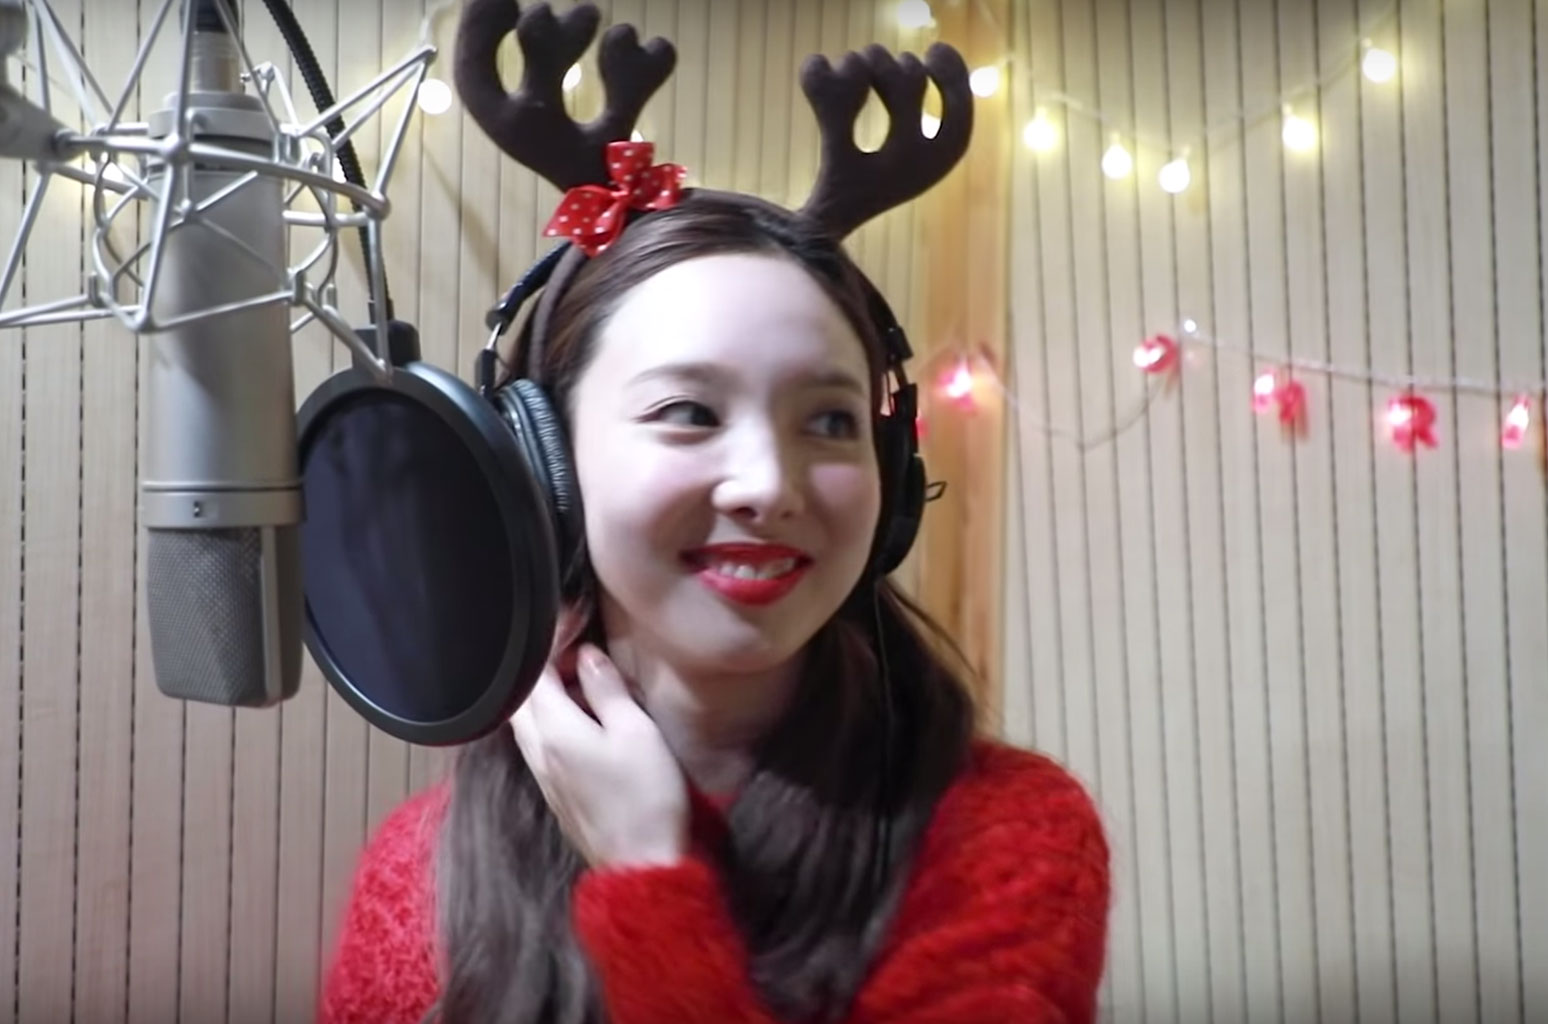 A Very Merry K-Pop Christmas: BTS, Blackpink, NCT 127 &amp; More Celebrate With New Holiday Covers - www.billboard.com - Santa